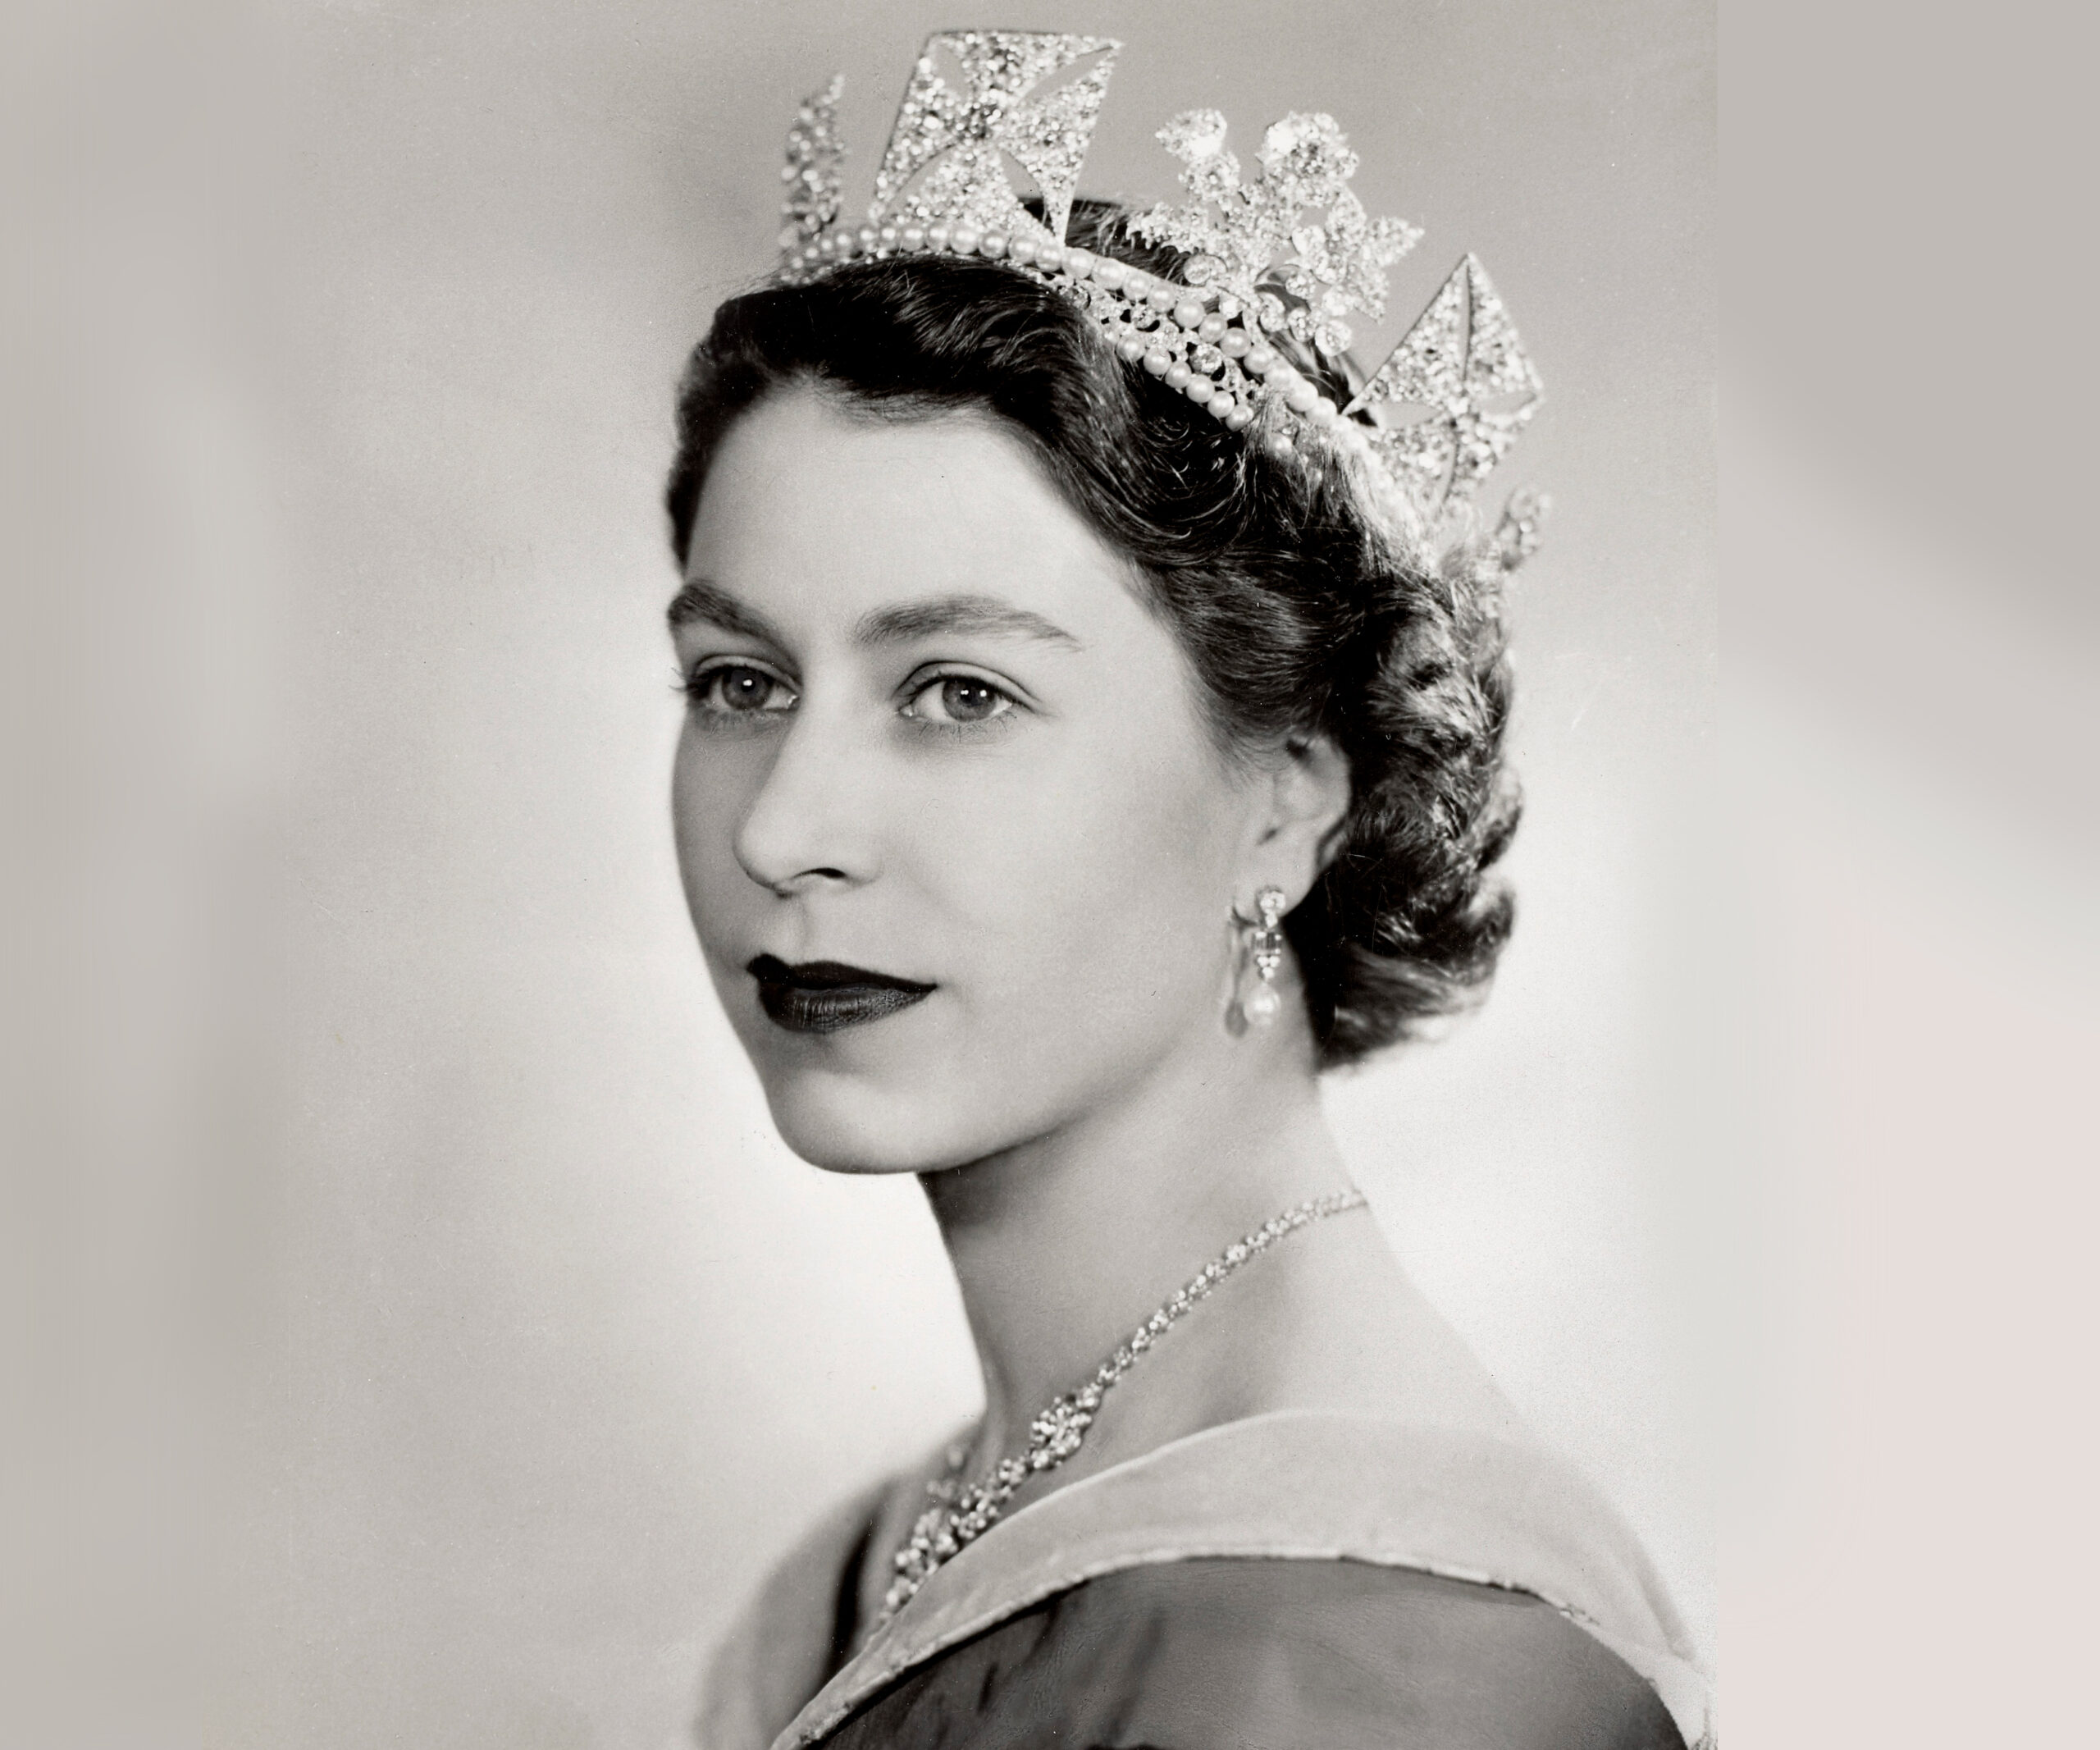 Becoming Queen: Elizabeth’s journey from Princess to Monarch